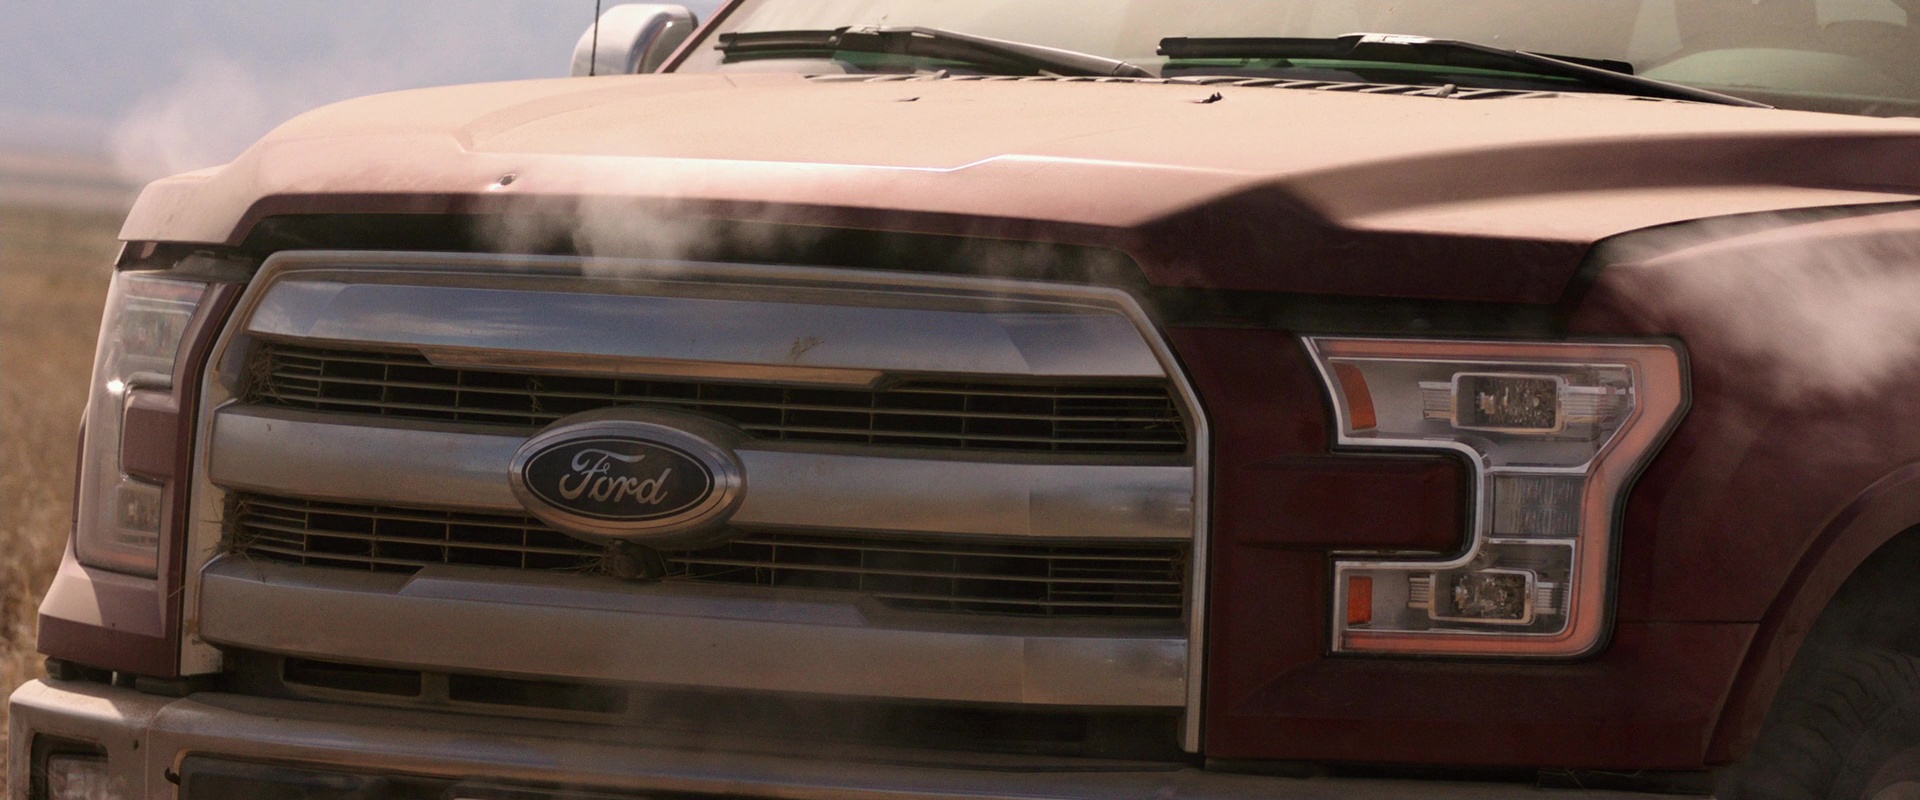 Ford F-150 Truck Used by Tommy Lee Jones in Just Getting Started (2017) Movie